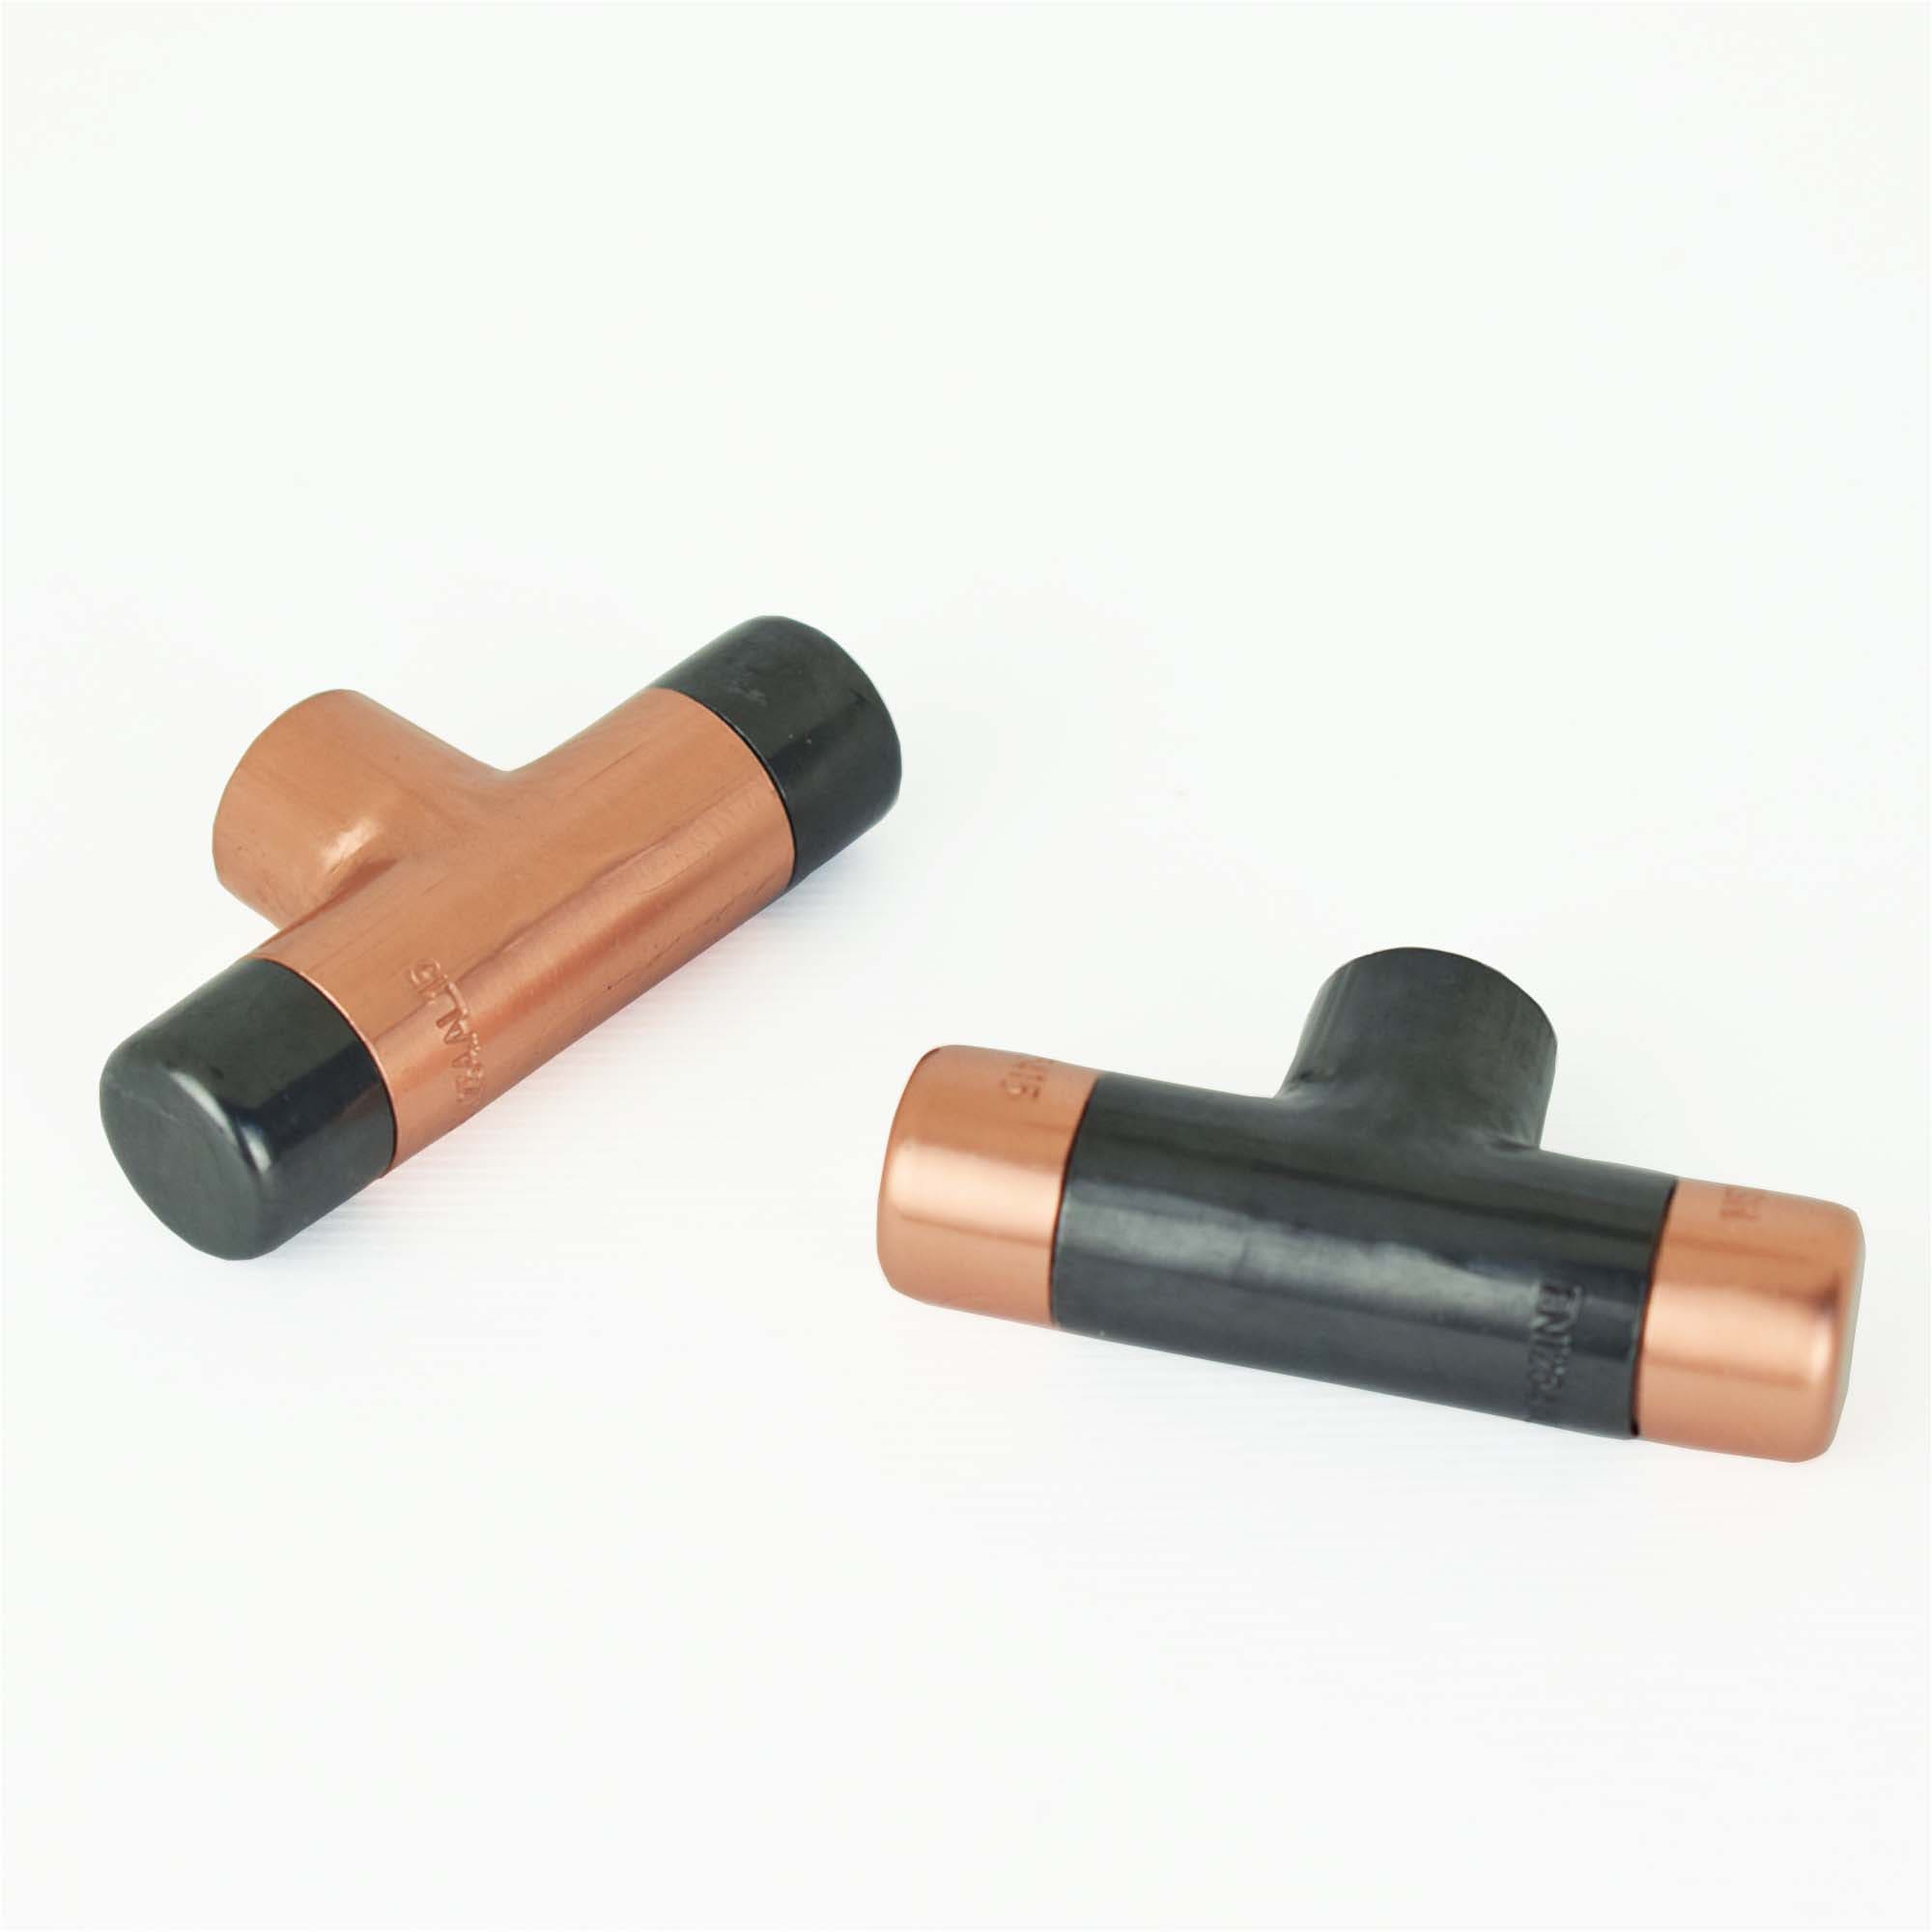 Copper Knob with Matt Black Ends T-Shaped - Two on White Background